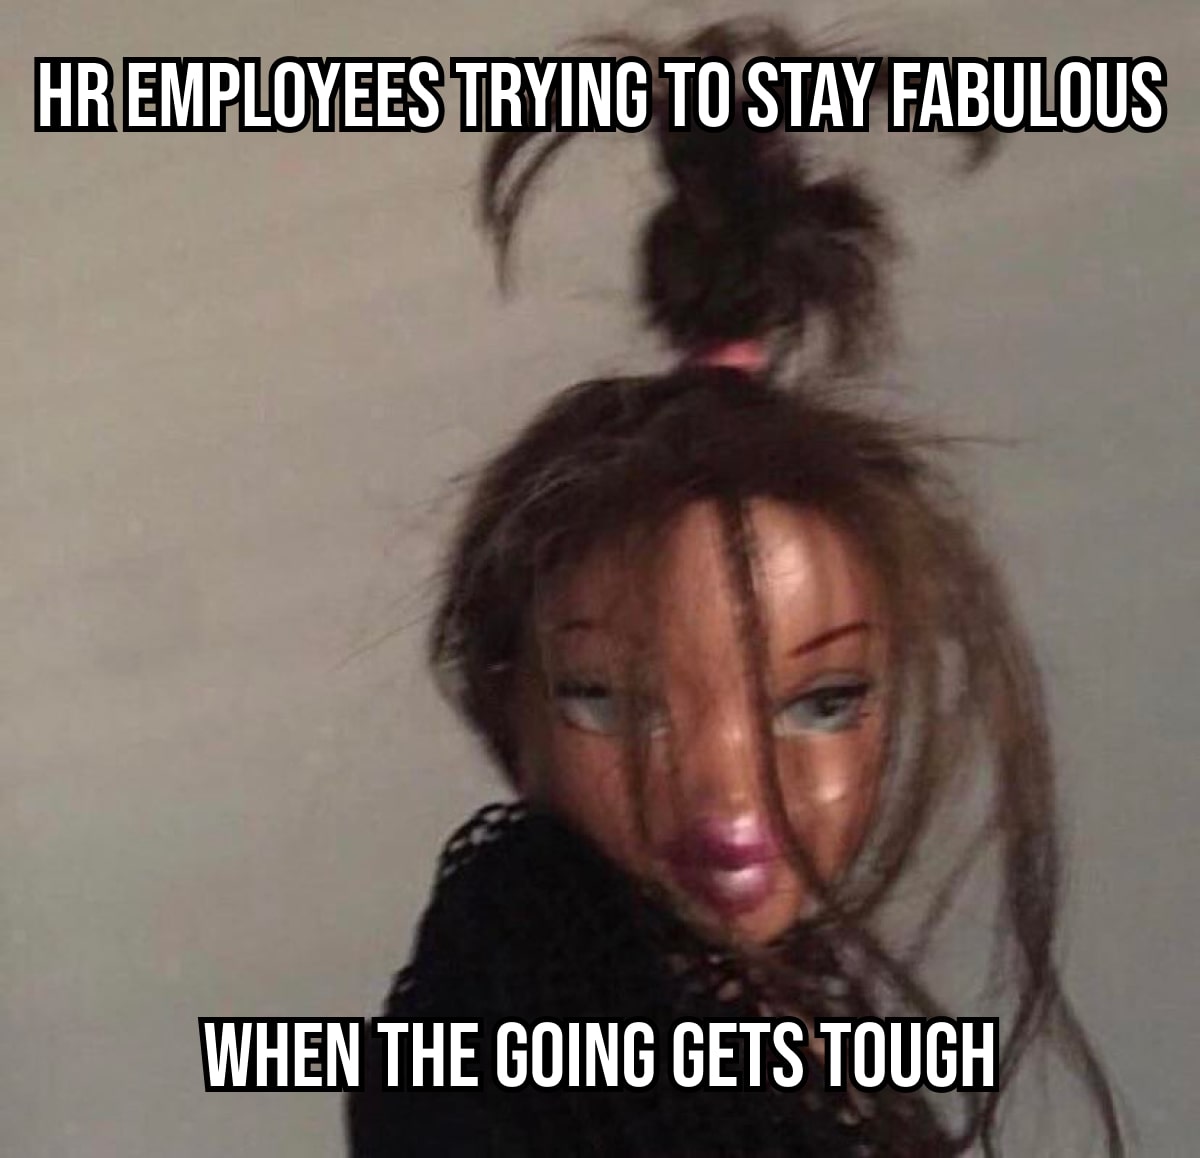 hr employees trying to stay fabulous-min